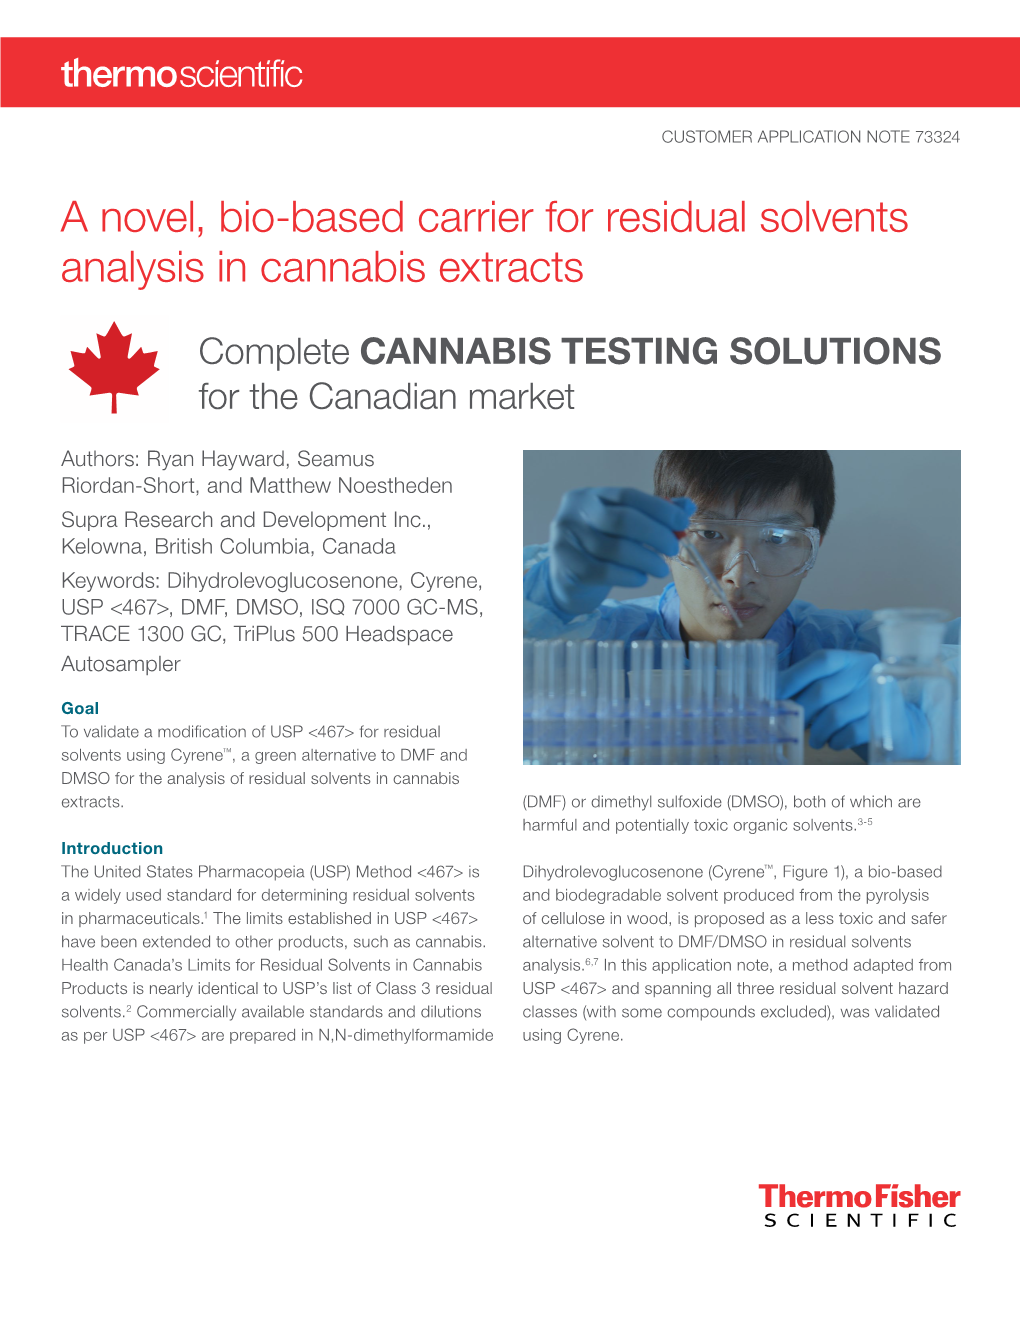 A Novel, Bio-Based Carrier for Residual Solvents Analysis in Cannabis Extracts